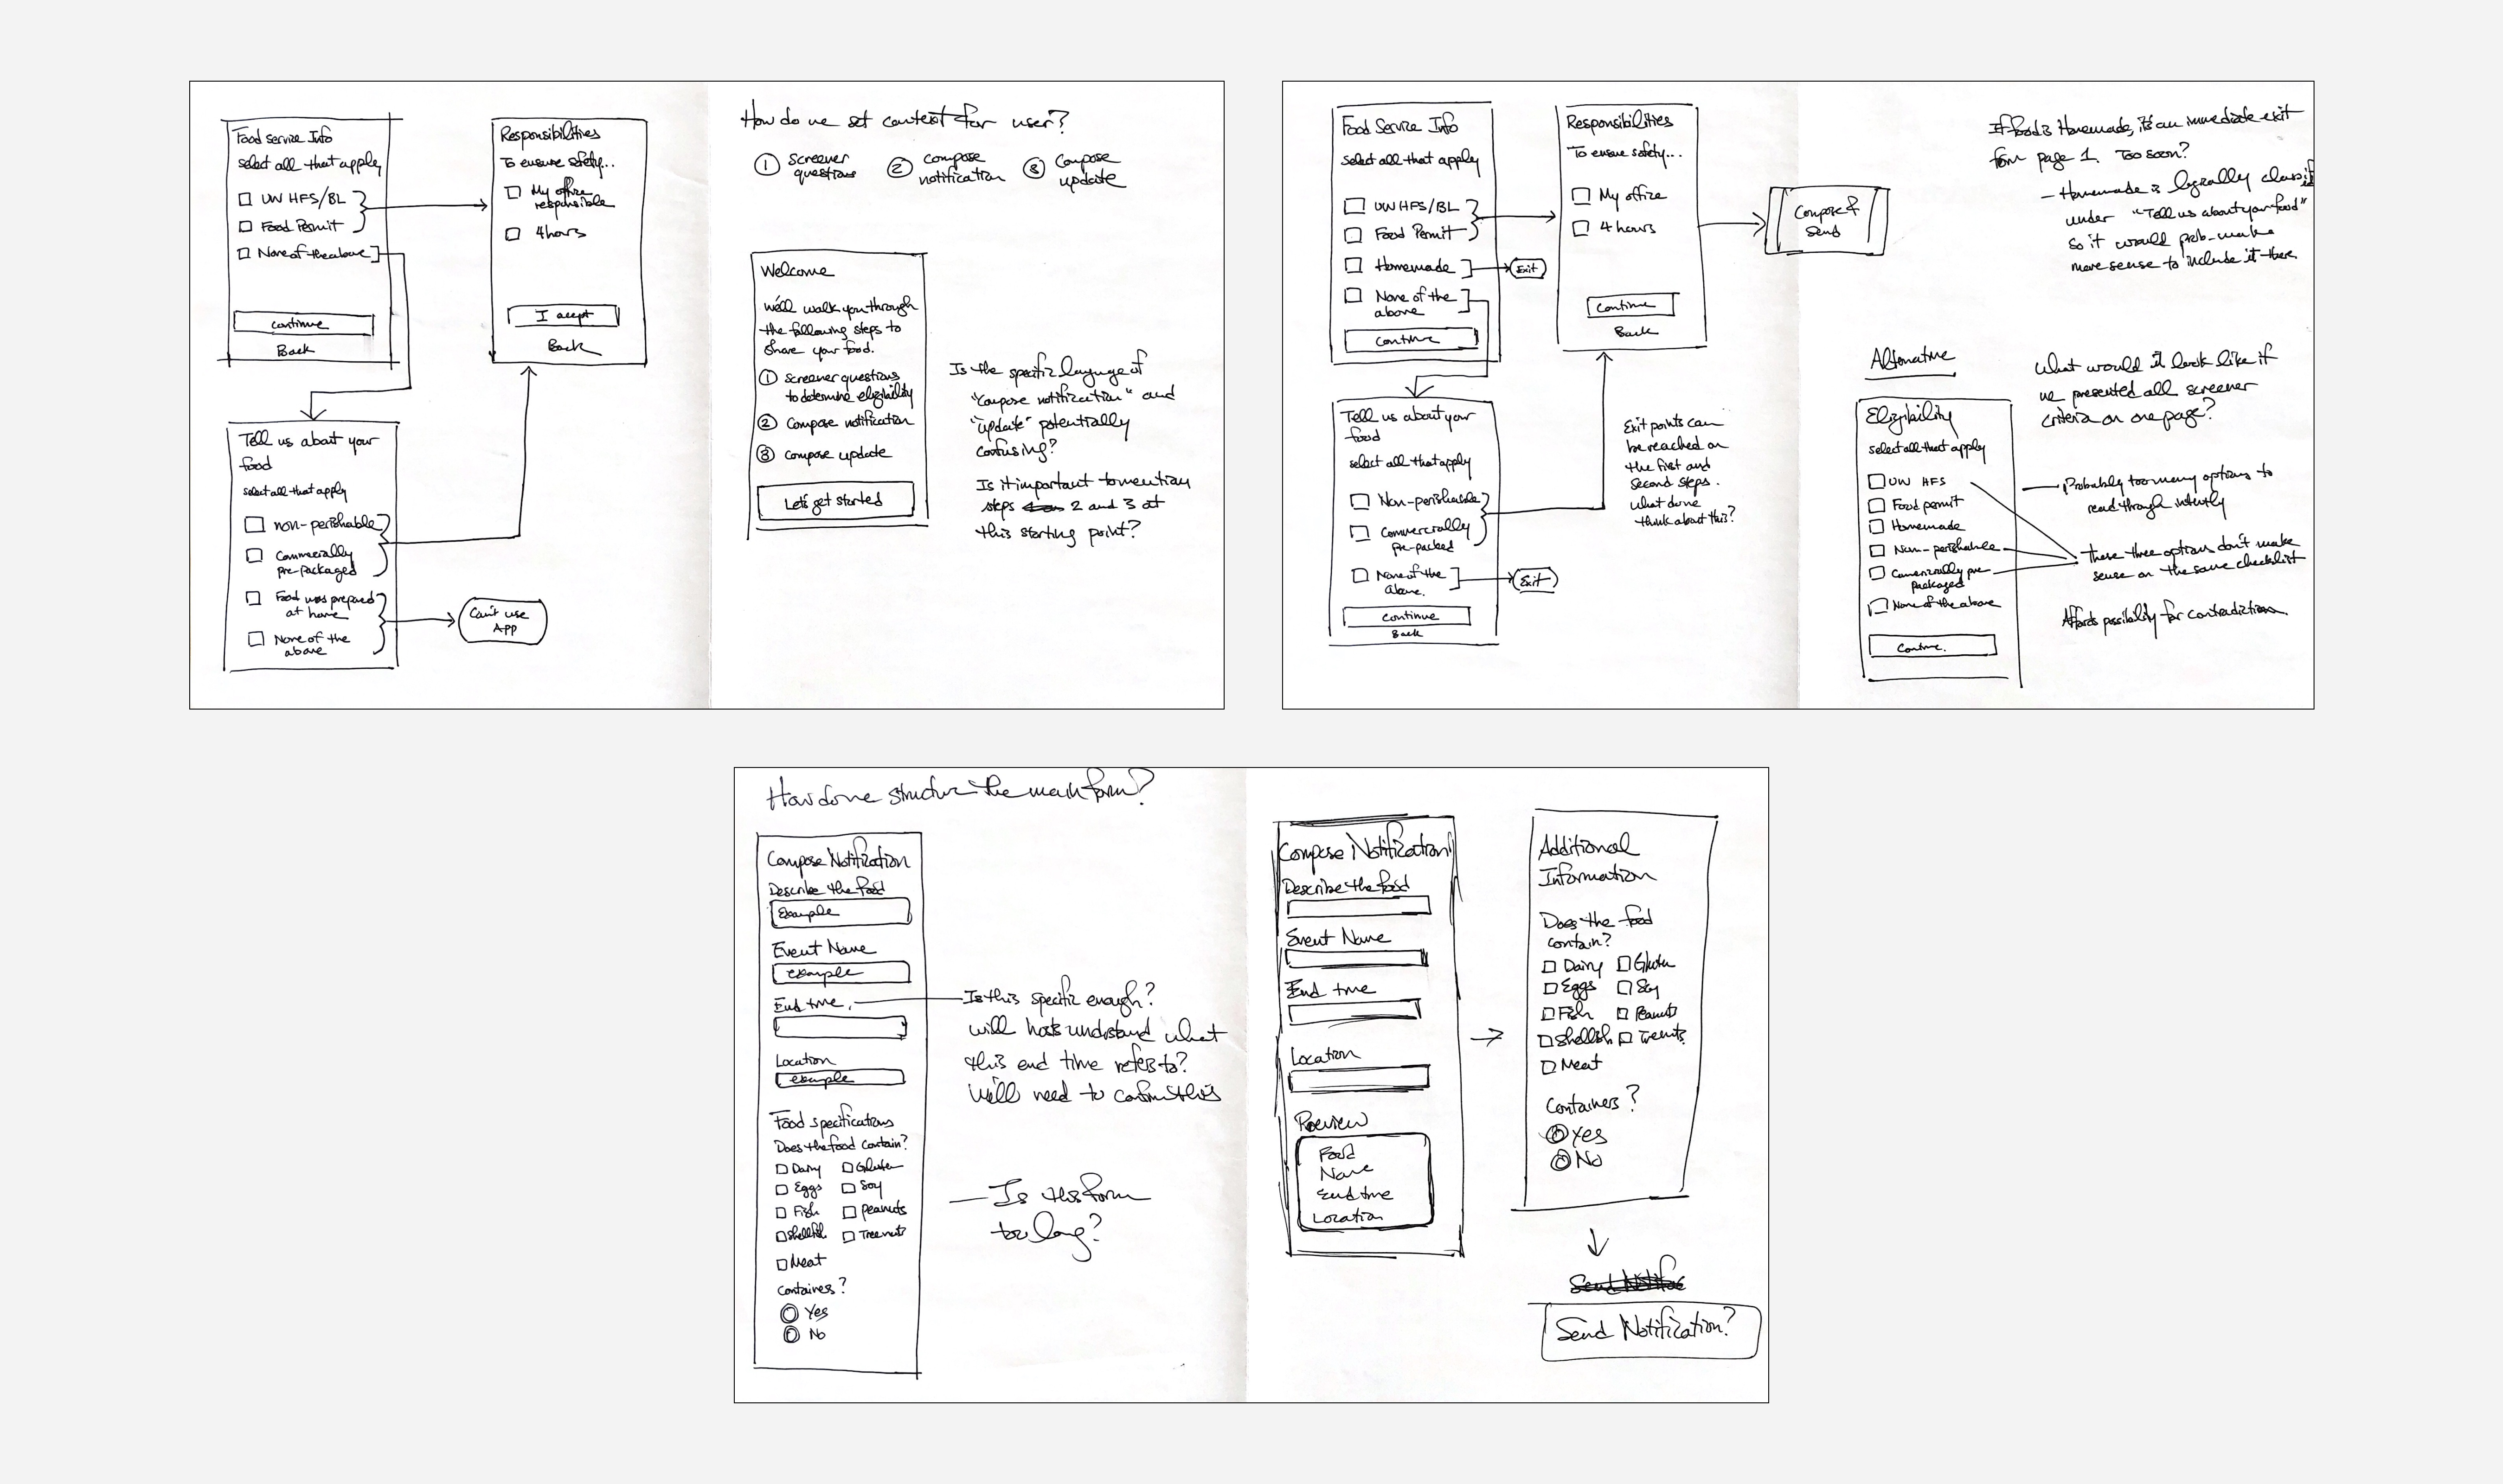 Pictures of three sketches that I did to iterate different interfaces